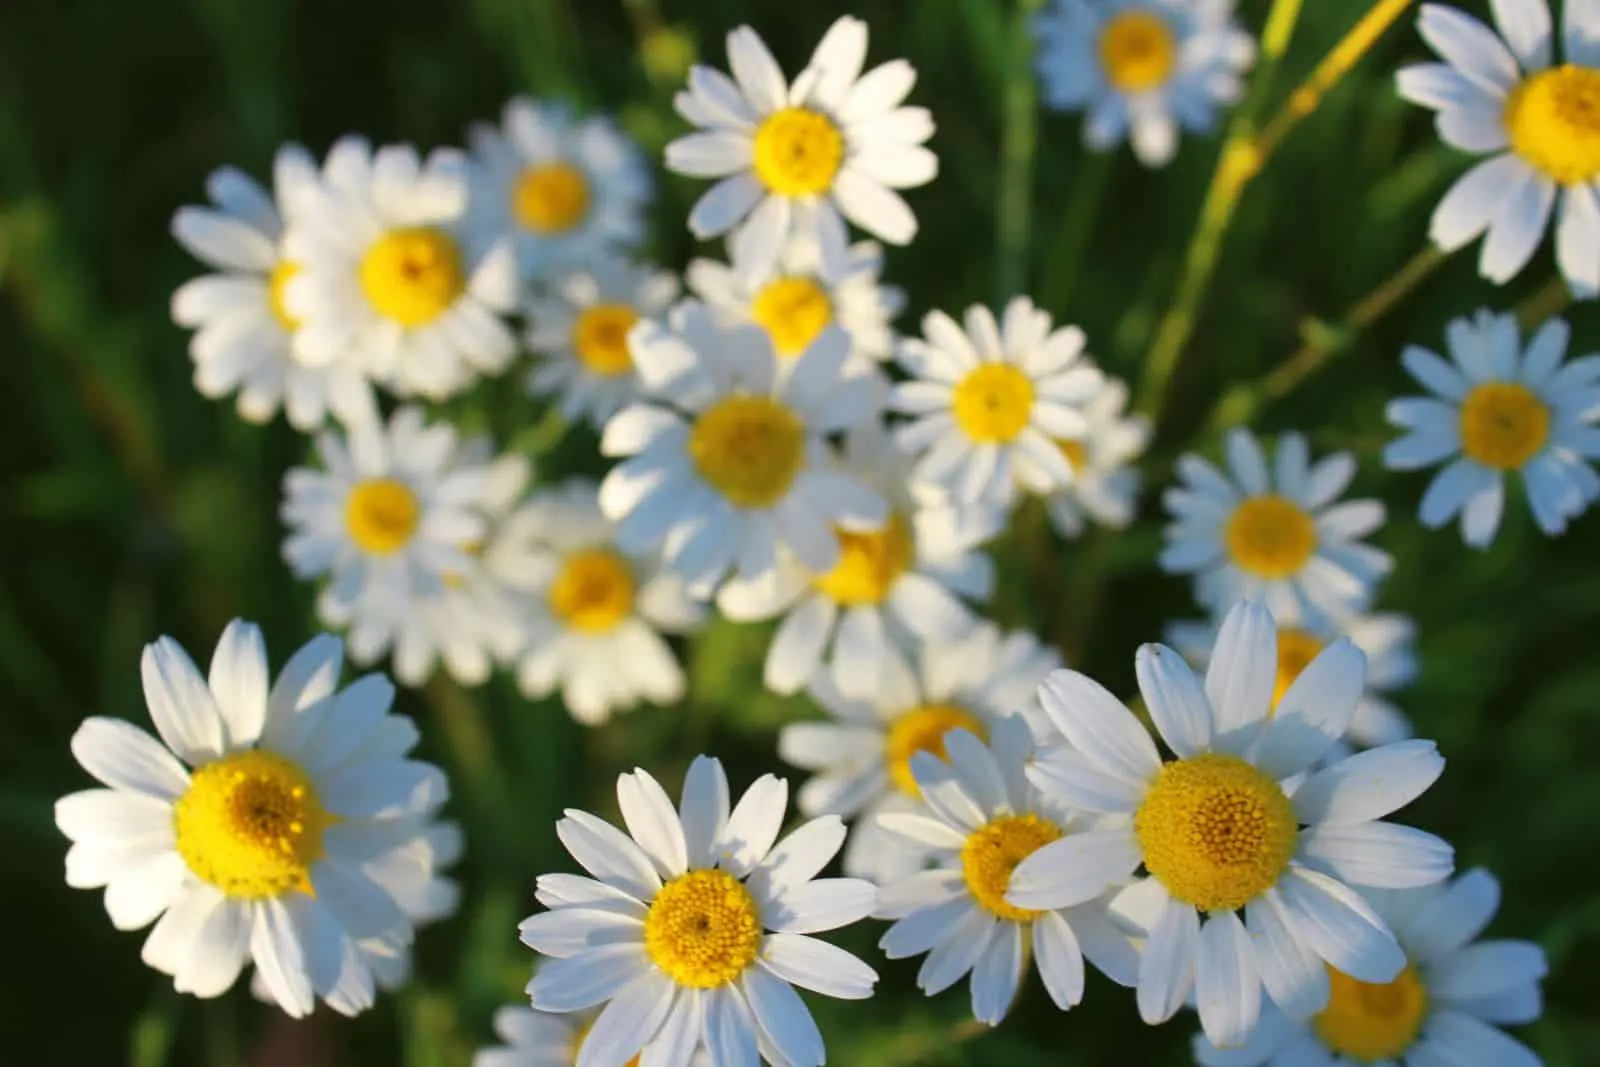 chamomile flowers with white petals